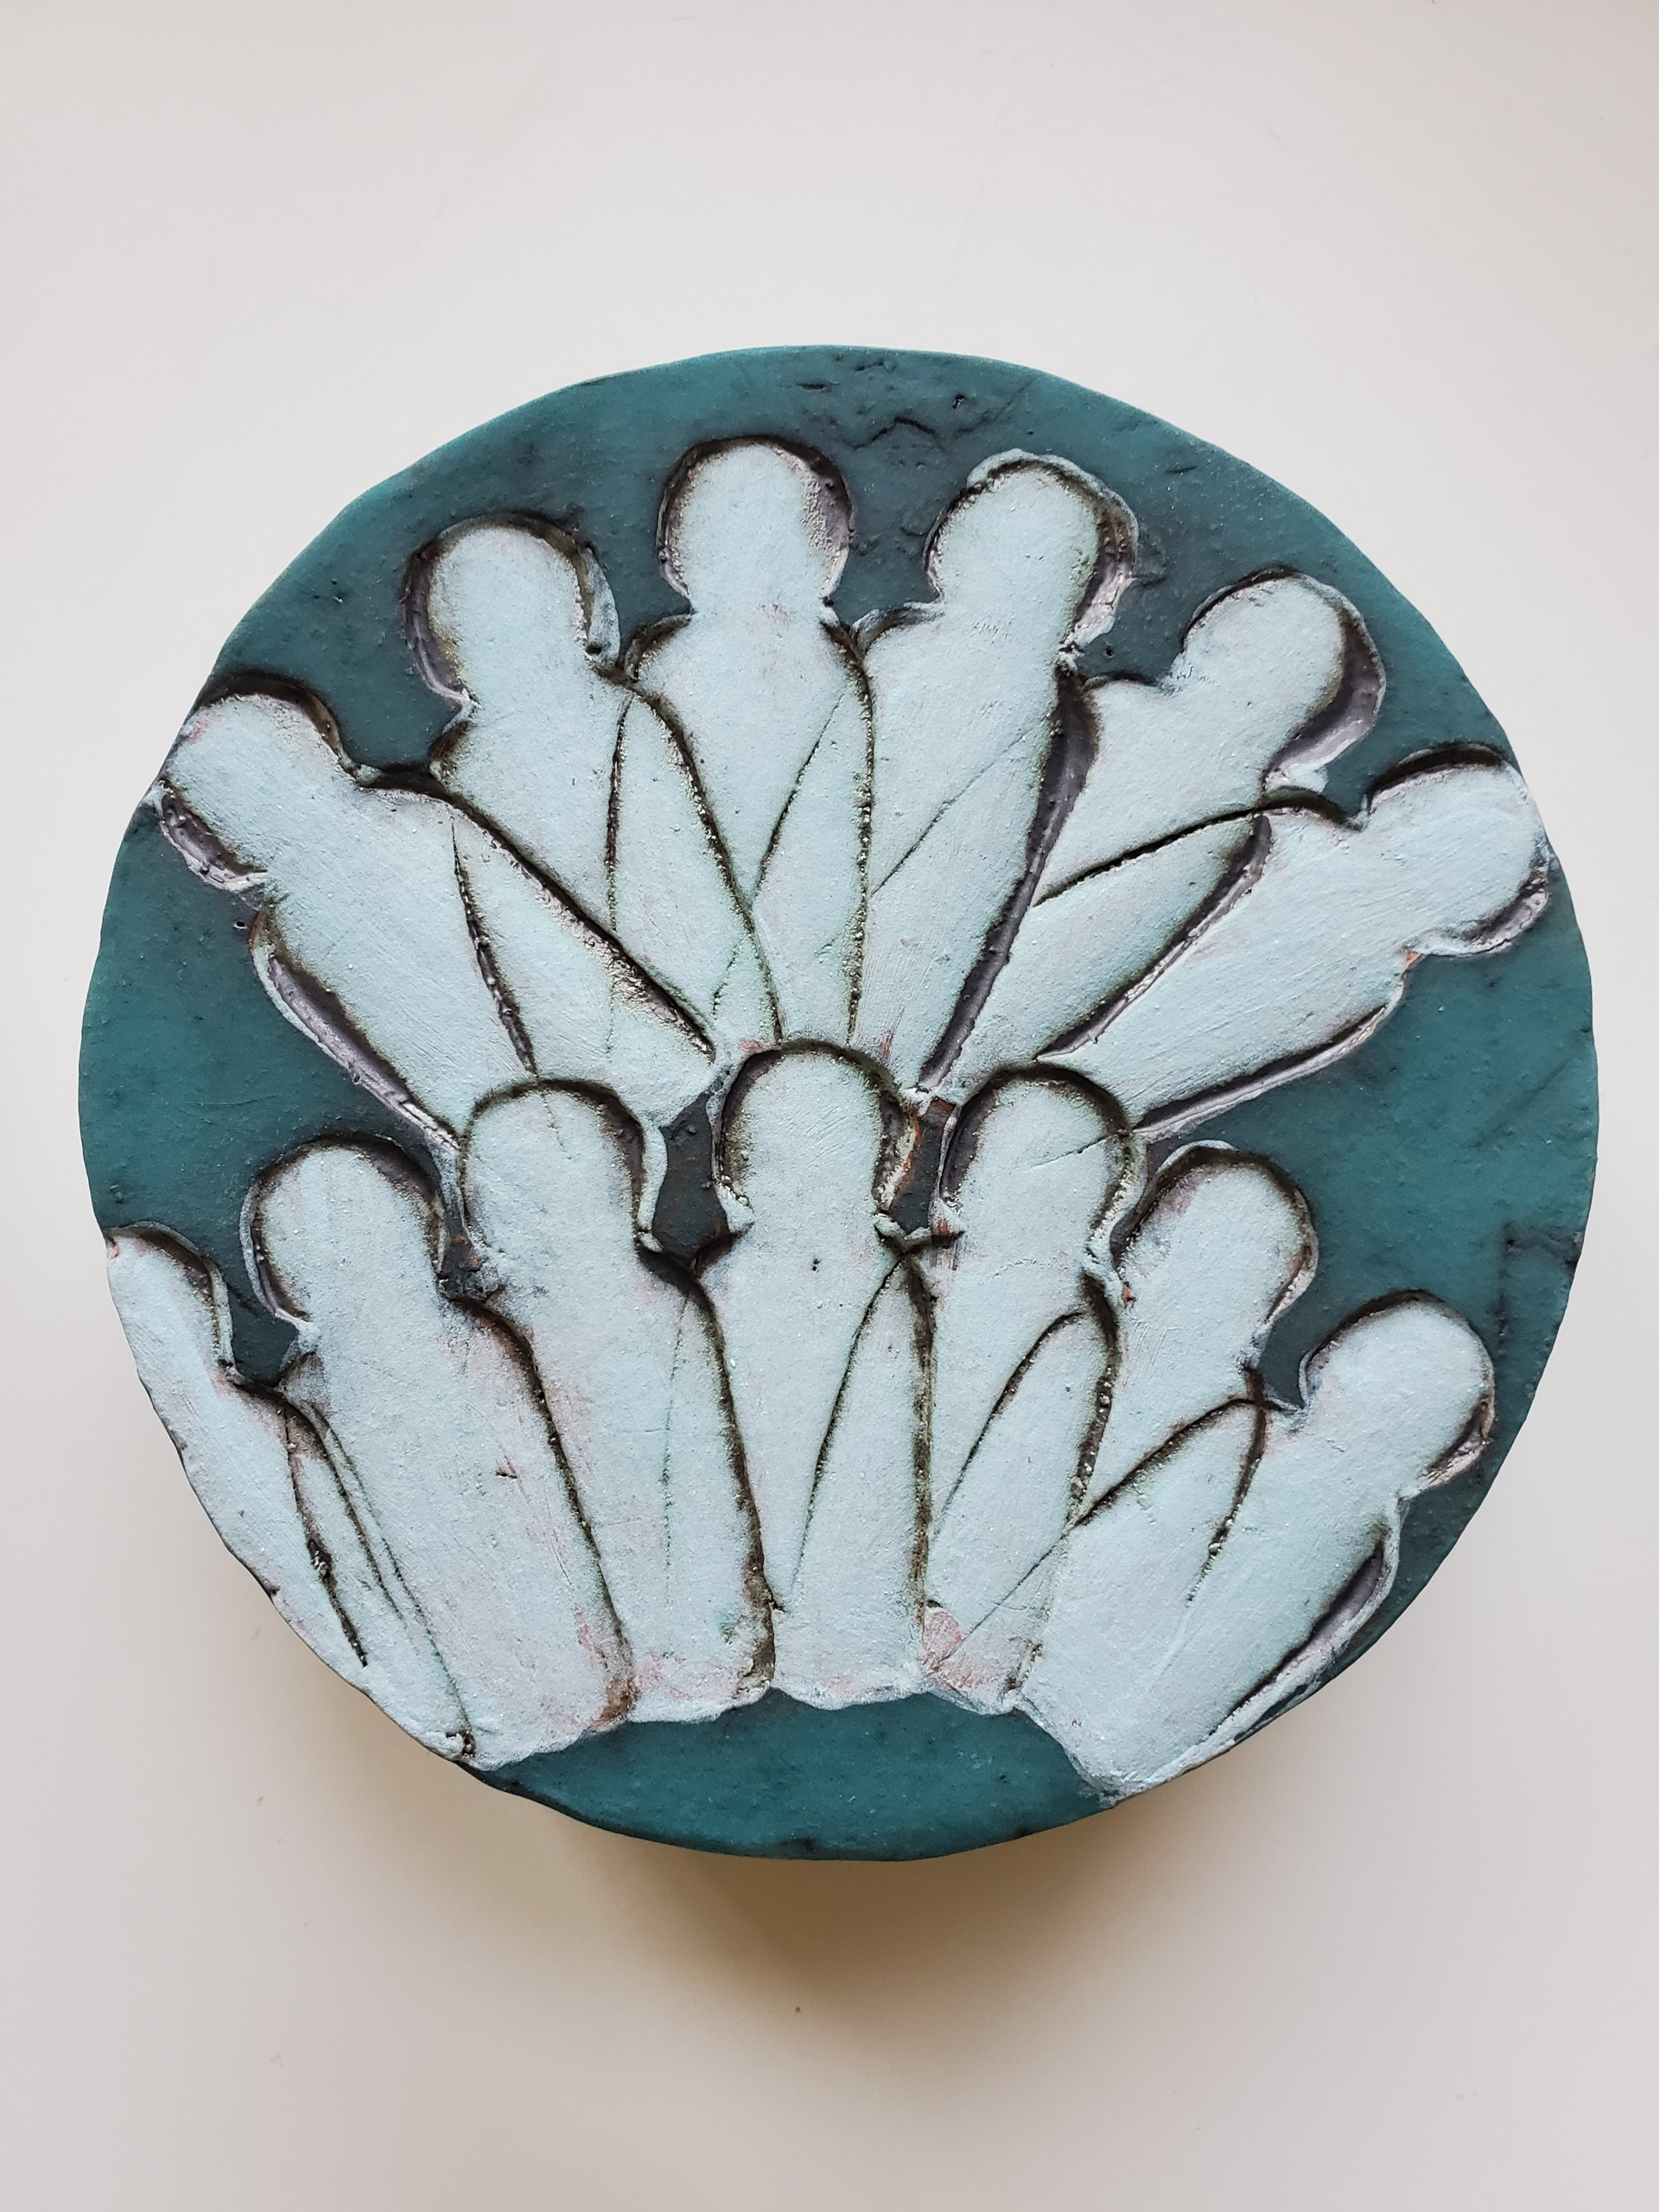 Small Ceramic Social Circle by Cassie Butcher